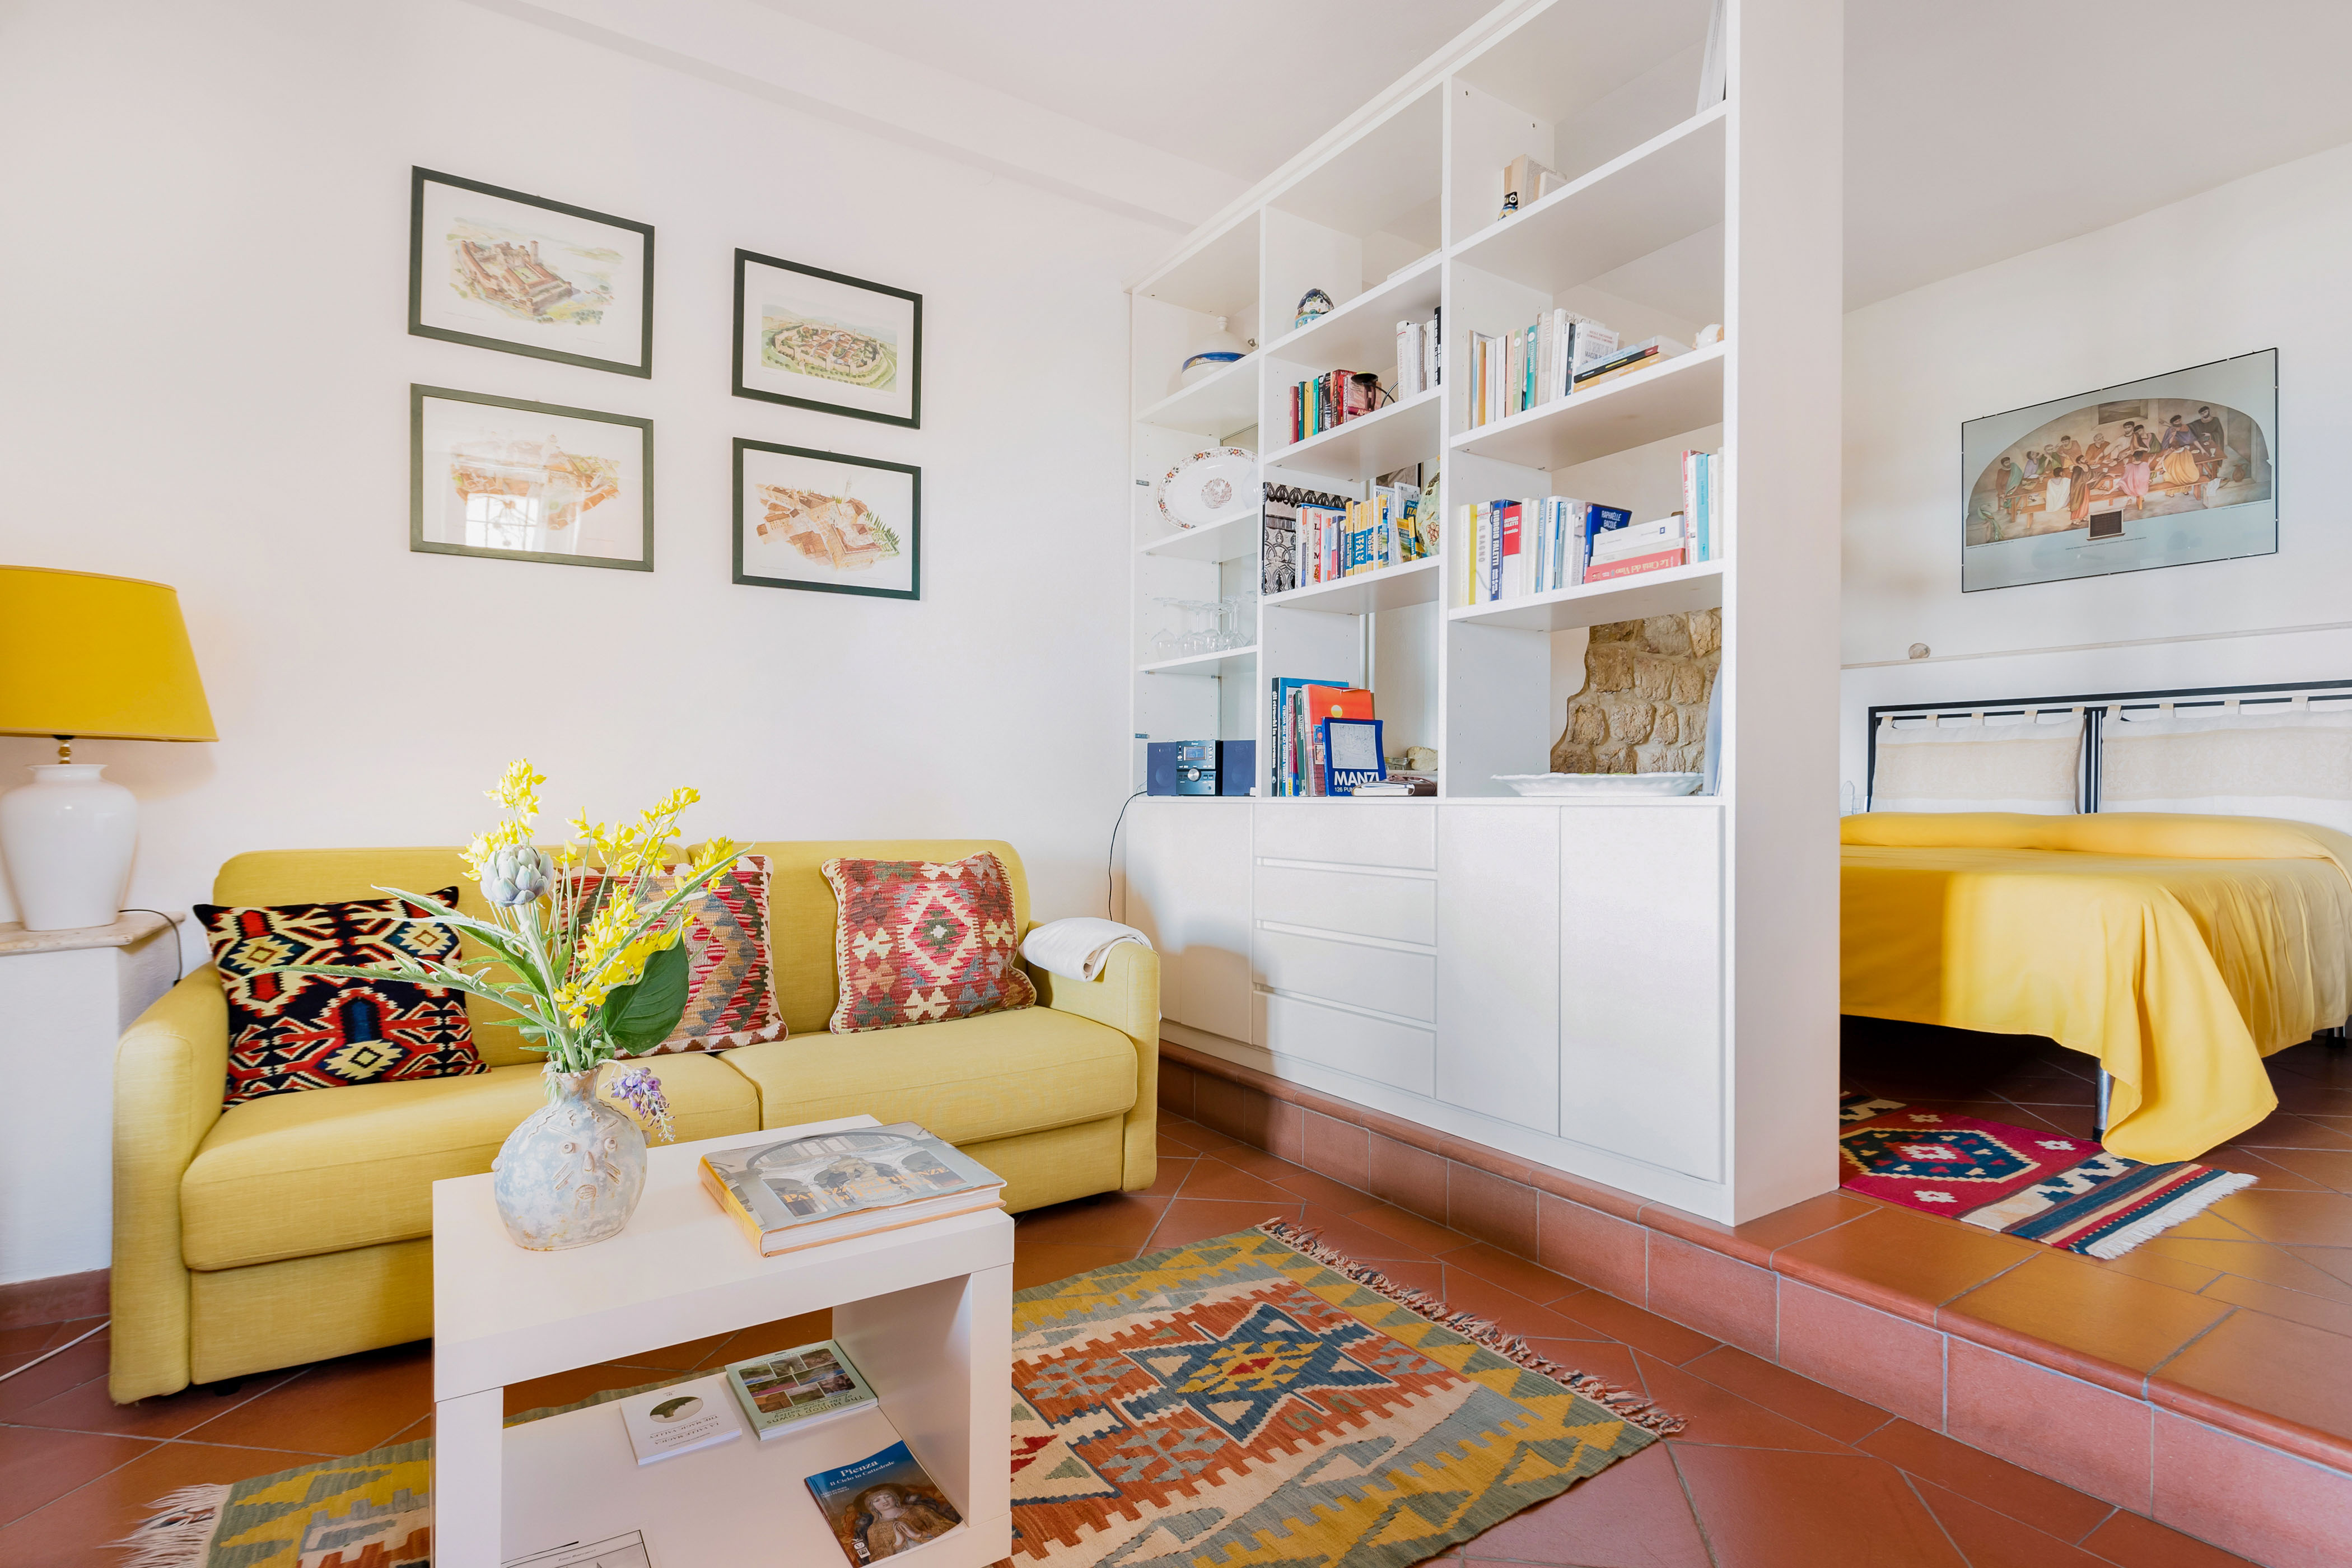 Sunken living room with a yellow couch and large white bookcase that steps up to a bedroom.